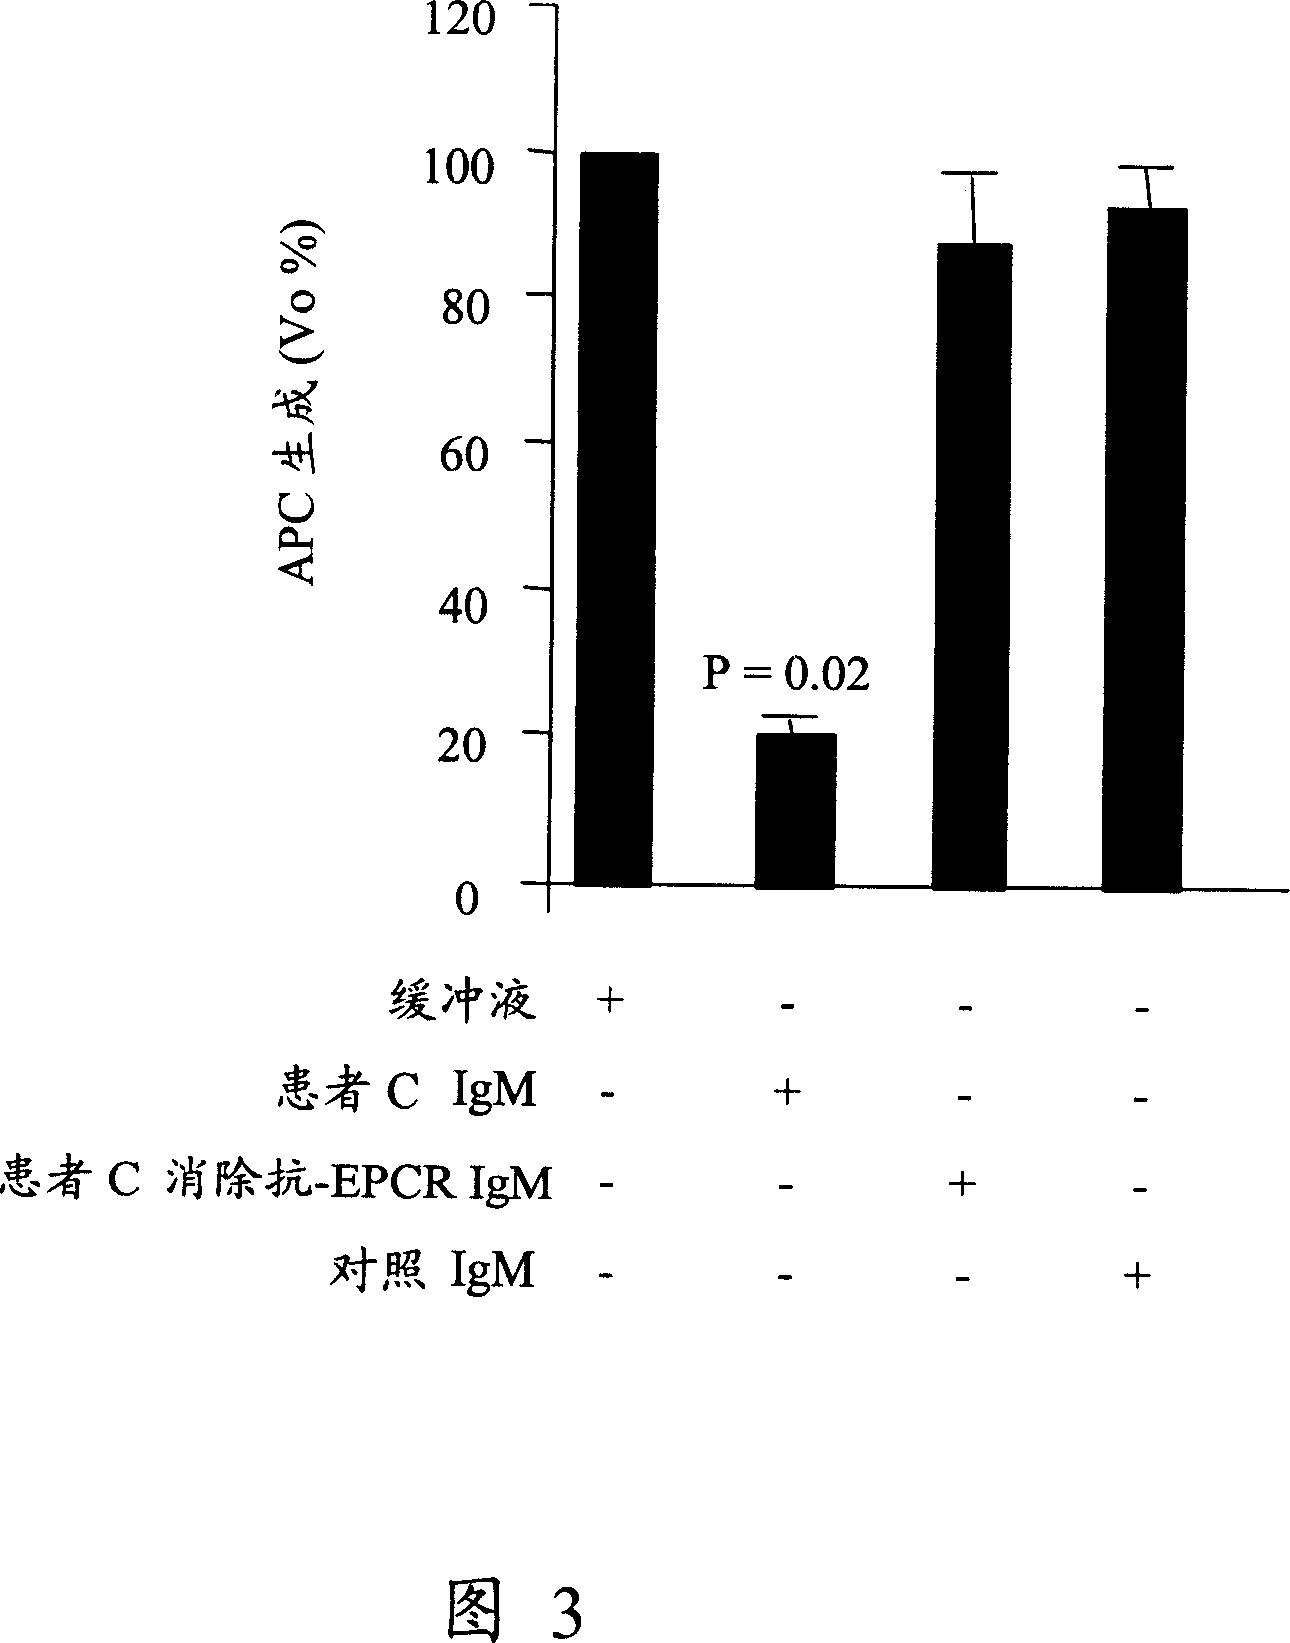 Method of assessing risk of and predisposition to the development of a pathology related to the presence of anti-EPCR antibodies